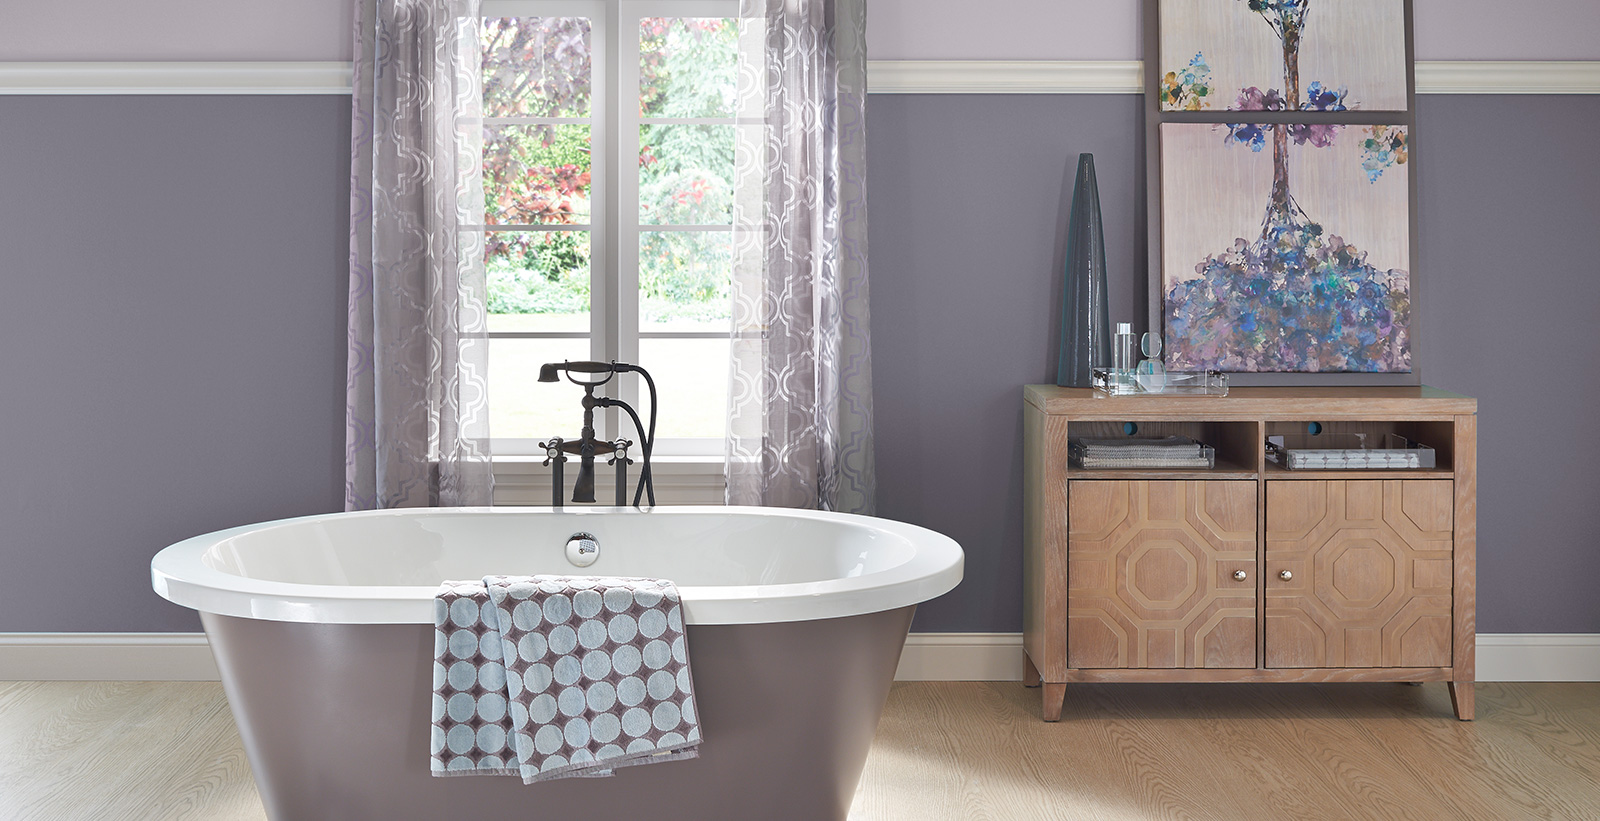 Relaxed and calming styled bathroom with purple walls and white trim.